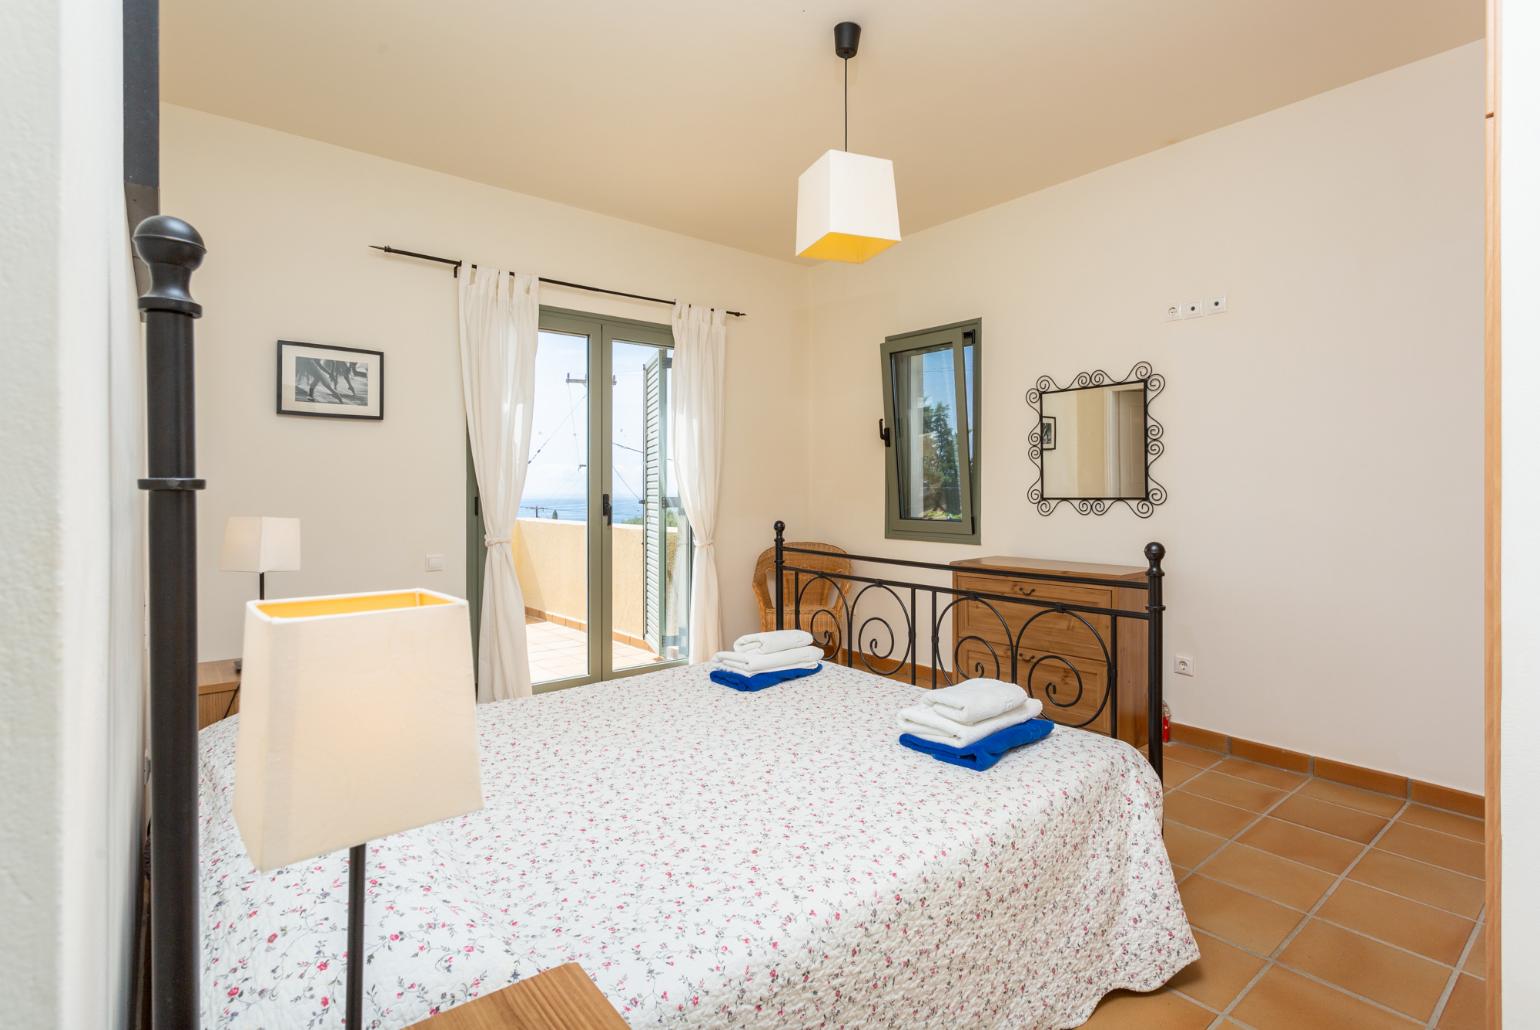 Double bedroom with en suite bathroom, A/C, and upper terrace access with sea views